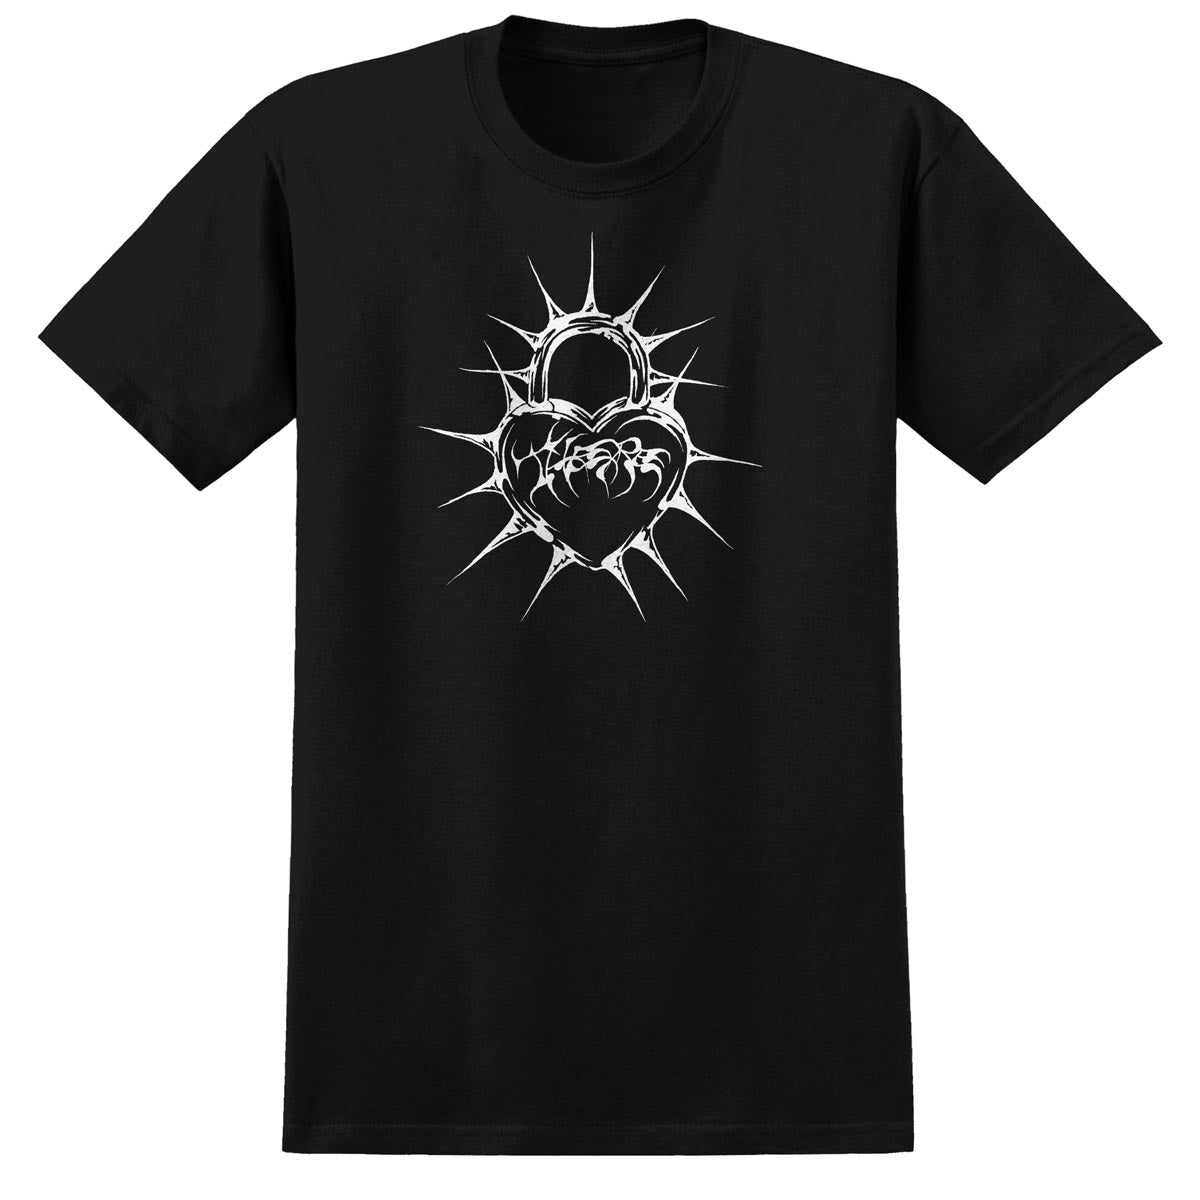 There Heart T-Shirt - Black/White image 1